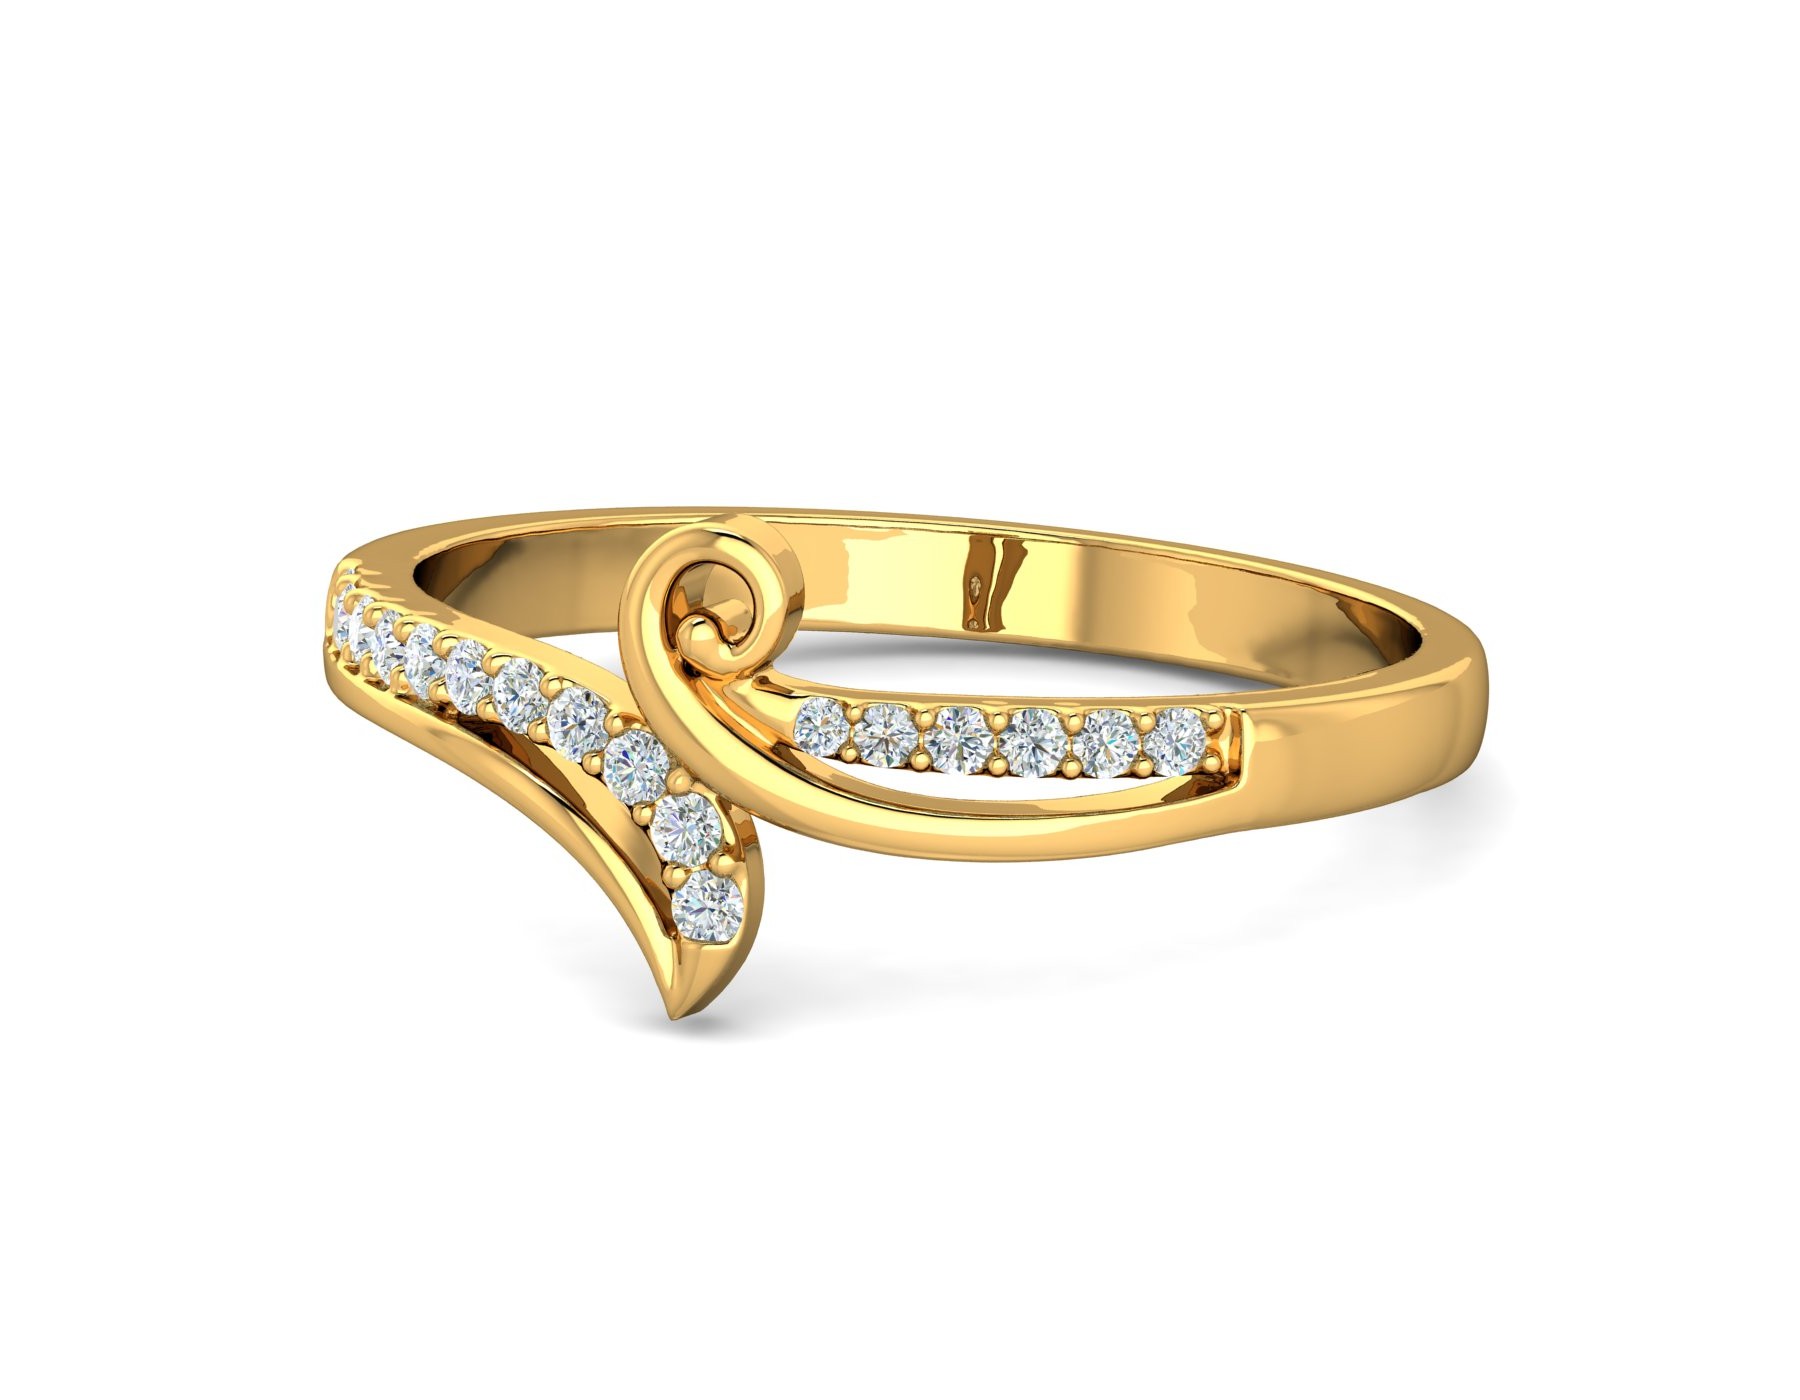 Buy quality Work Were Plain Gold Casting Ladies Ring LRG -0519 in Ahmedabad